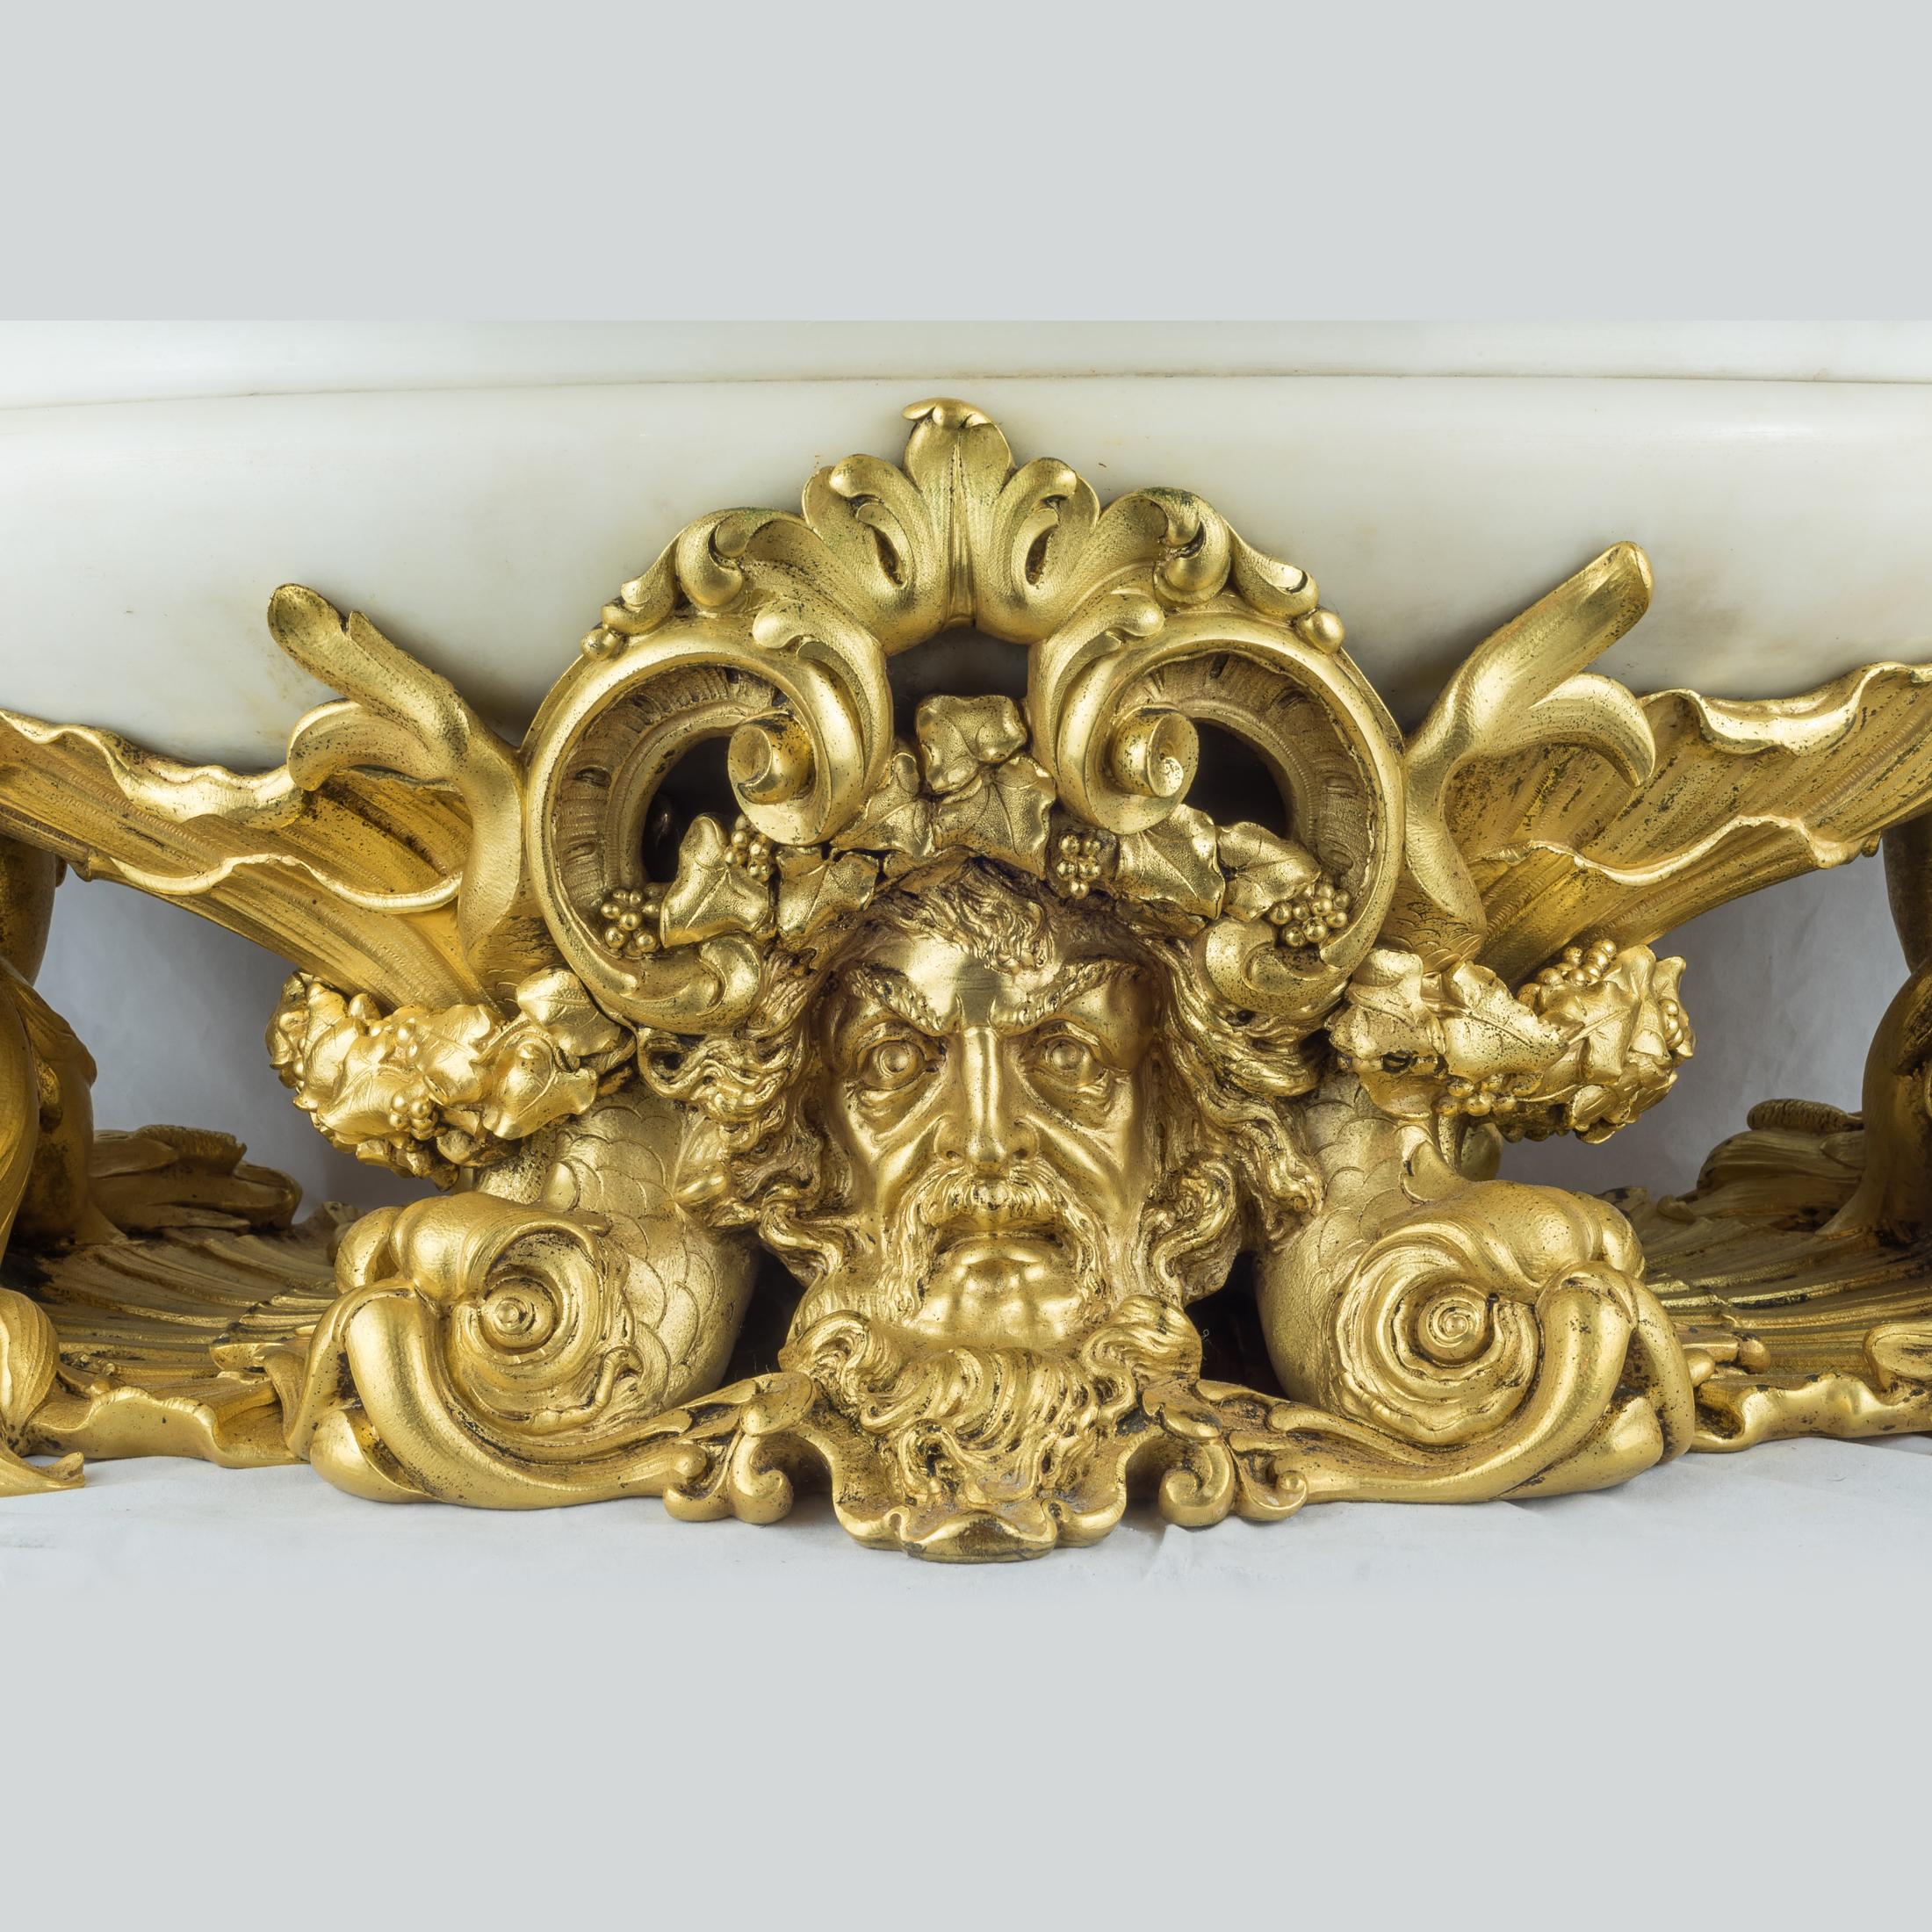 Carved Magnificent Large Caldwell & Co. Ormolu and White Marble Centerpiece